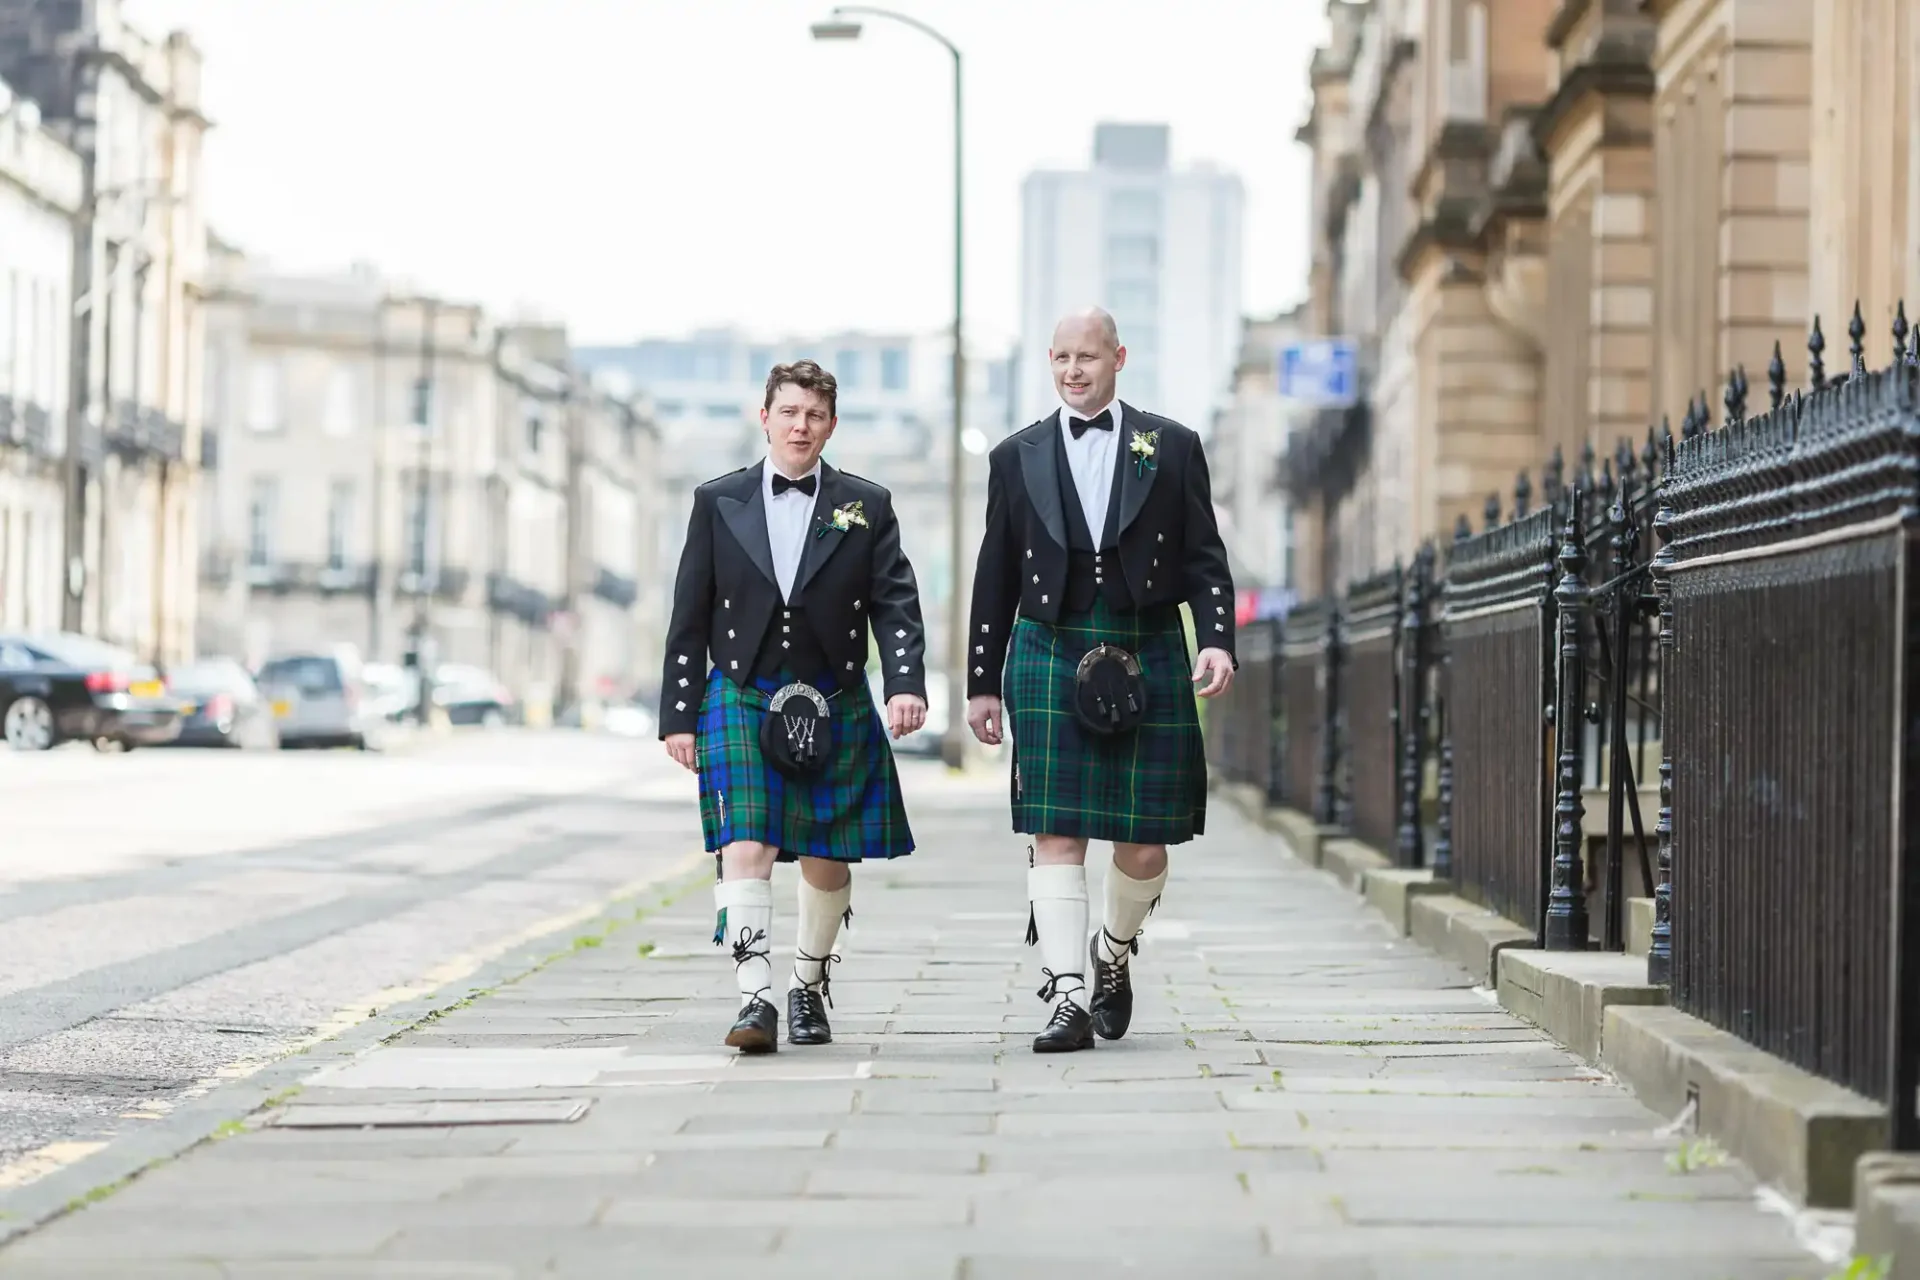 Two men dressed in traditional scottish kilts and jackets walking along a city street, with buildings and parked cars in the background.